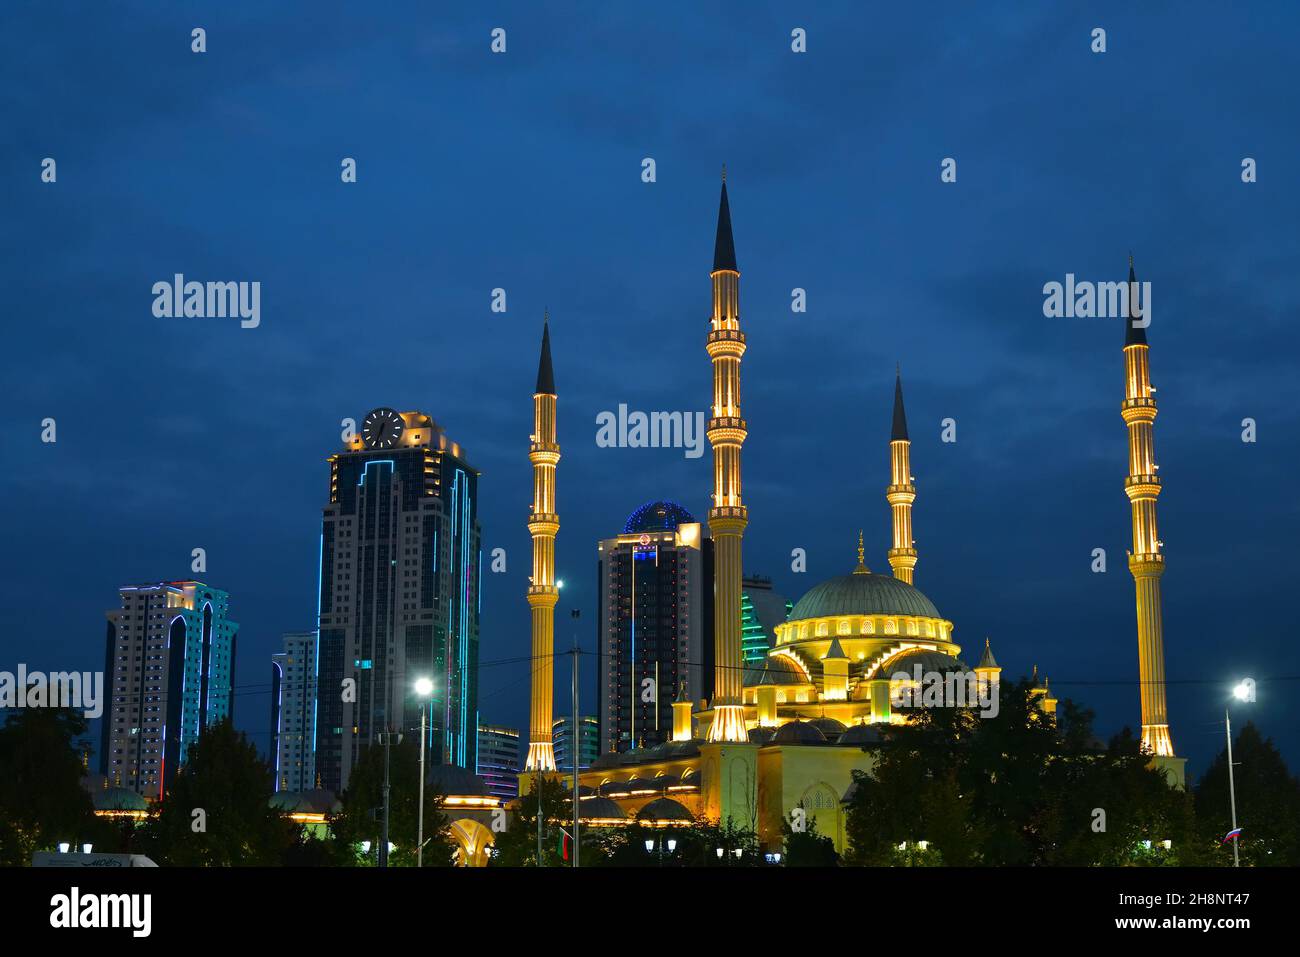 Grozny, Chechnya, Russia - September 13, 2021: Akhmad Kadyrov Mosque Heart of Chechnya and skyscrapers of downtown shown at night Stock Photo